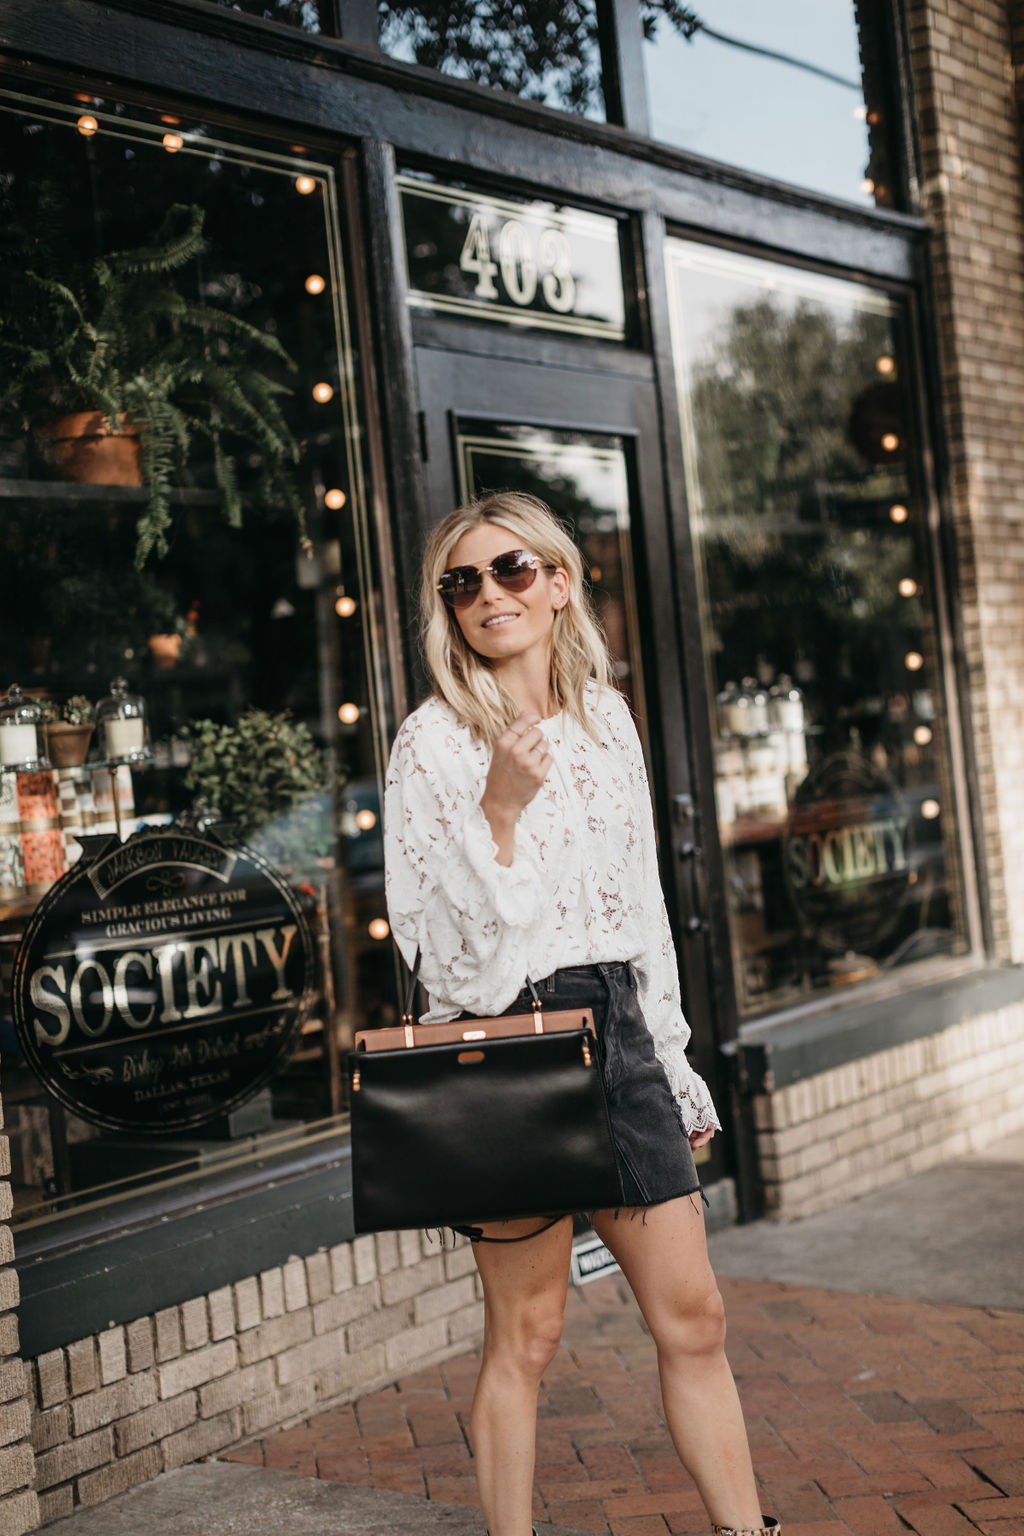 woman wearing white top, black skirt, and holding black bag SHOPBOP SPRING SALE 2020